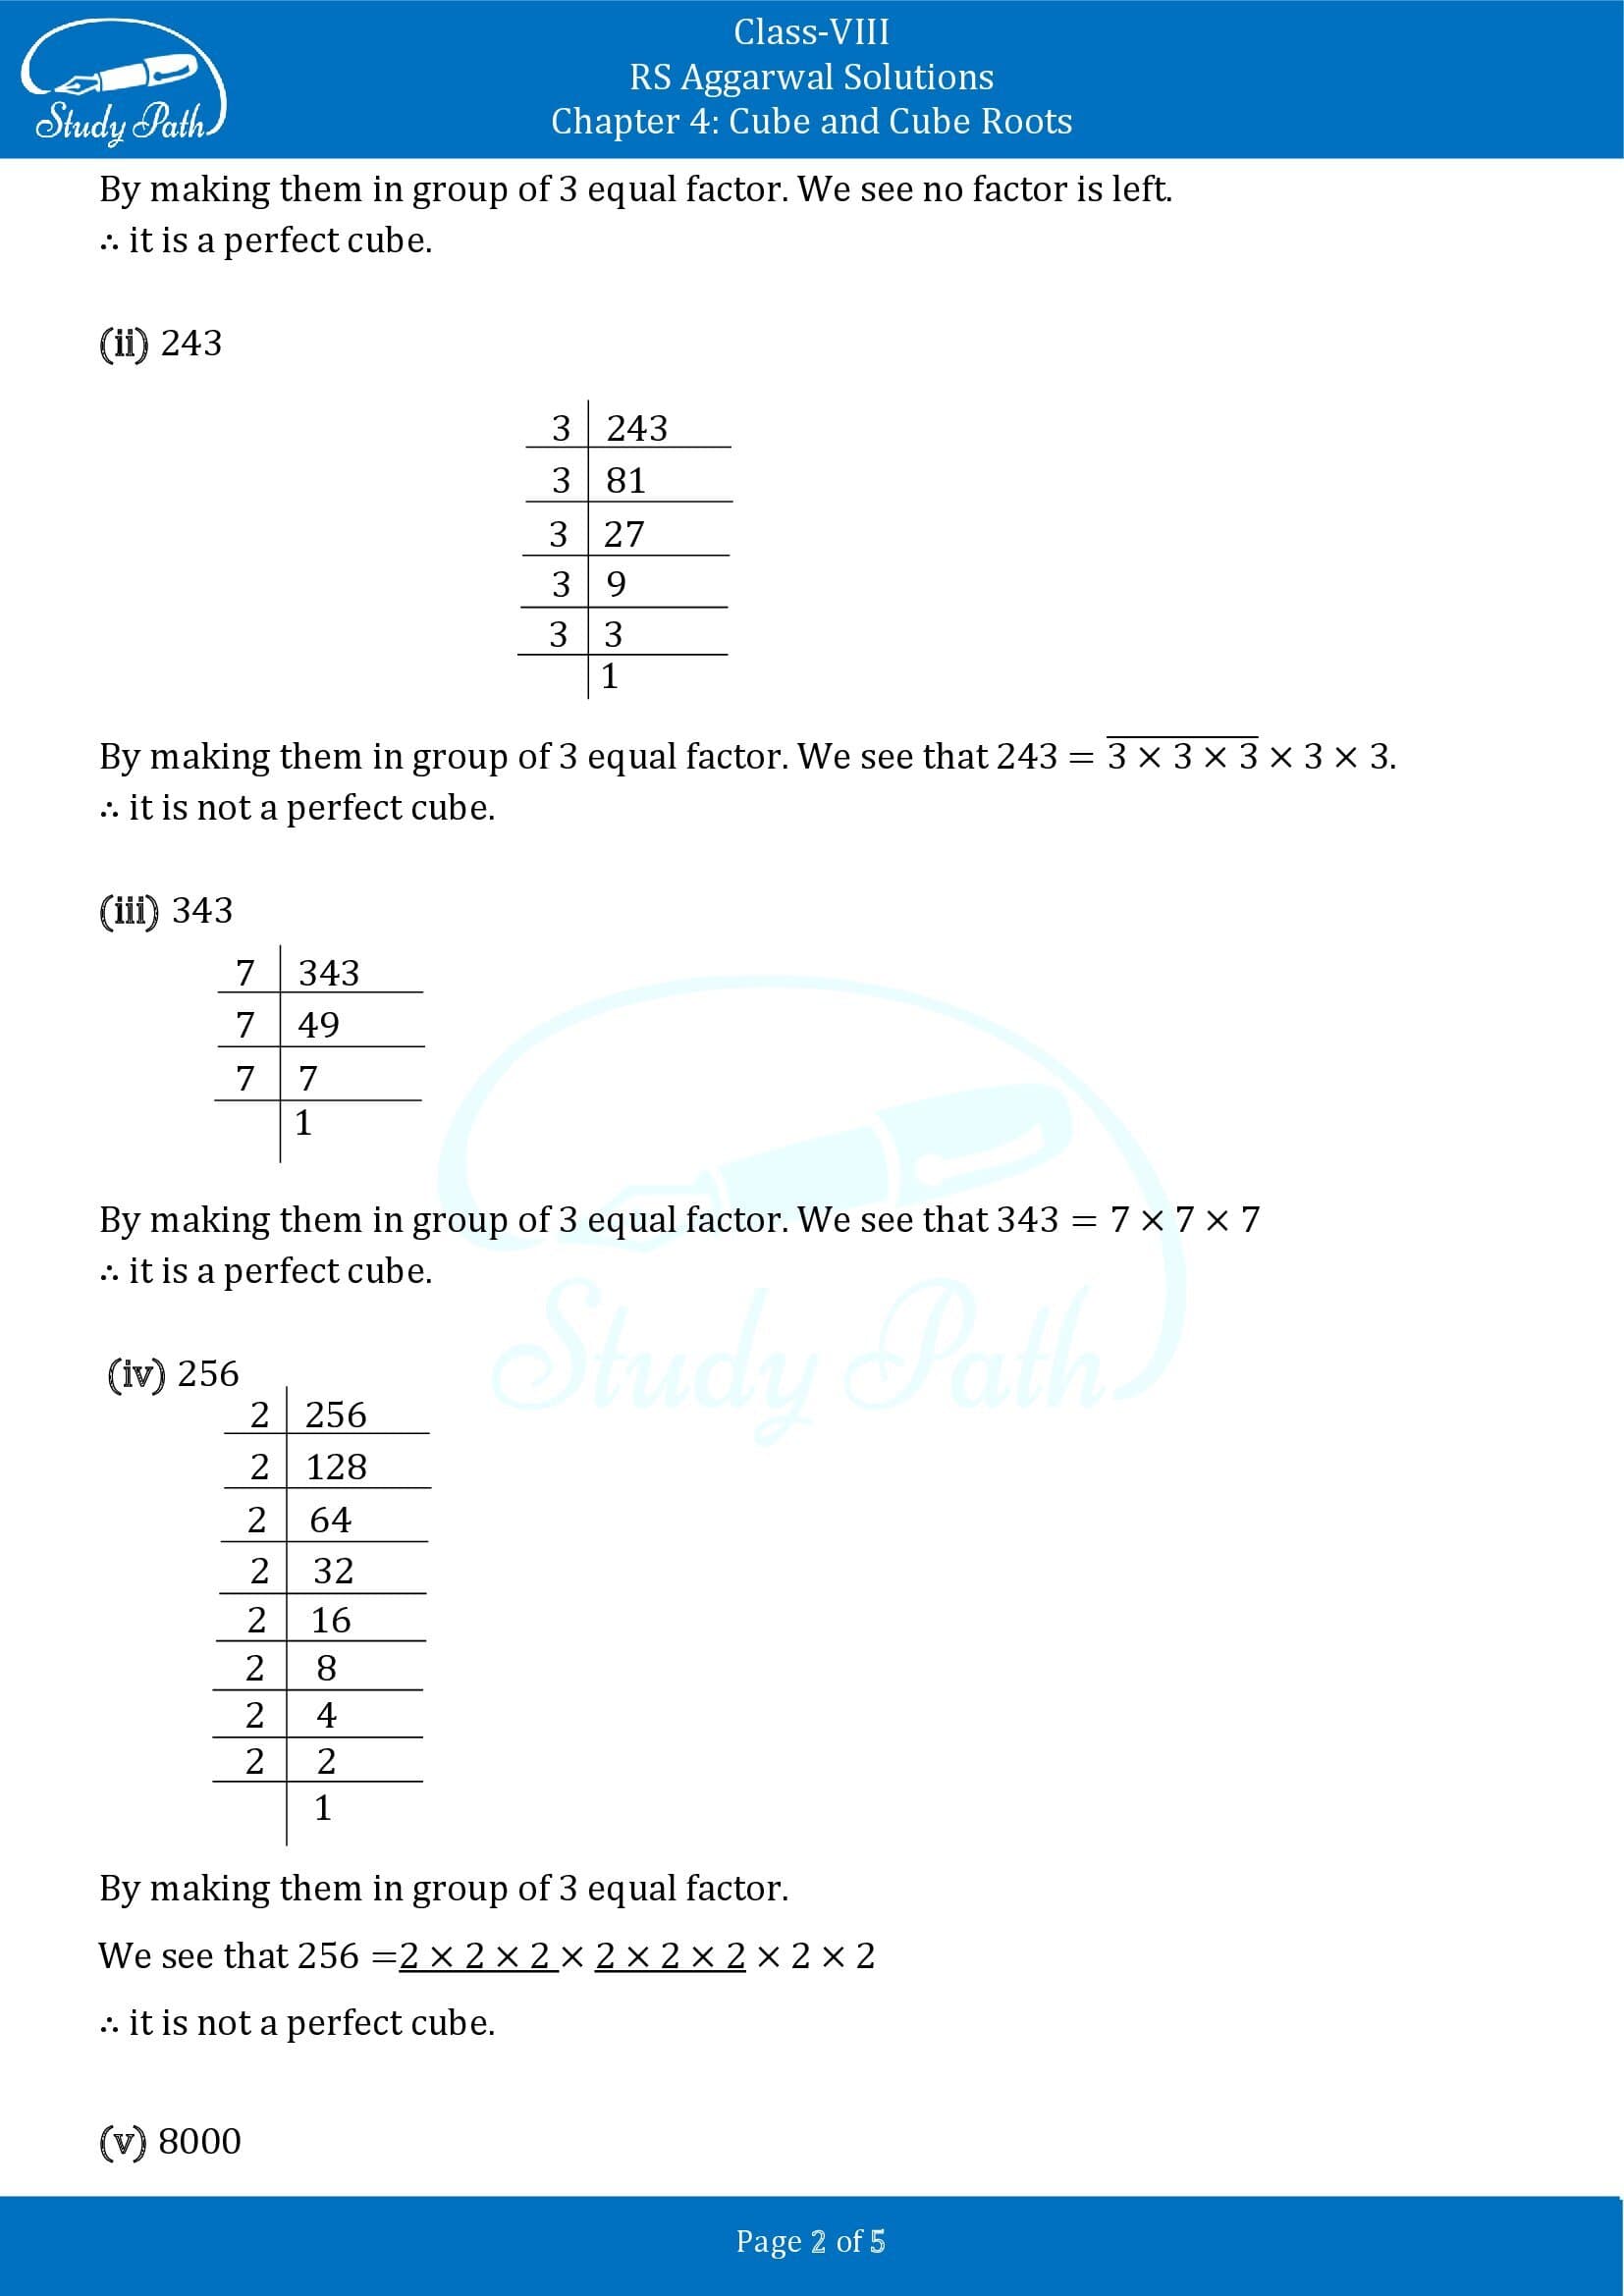 RS Aggarwal Solutions Class 8 Chapter 4 Cube and Cube Roots Exercise 4A 00002